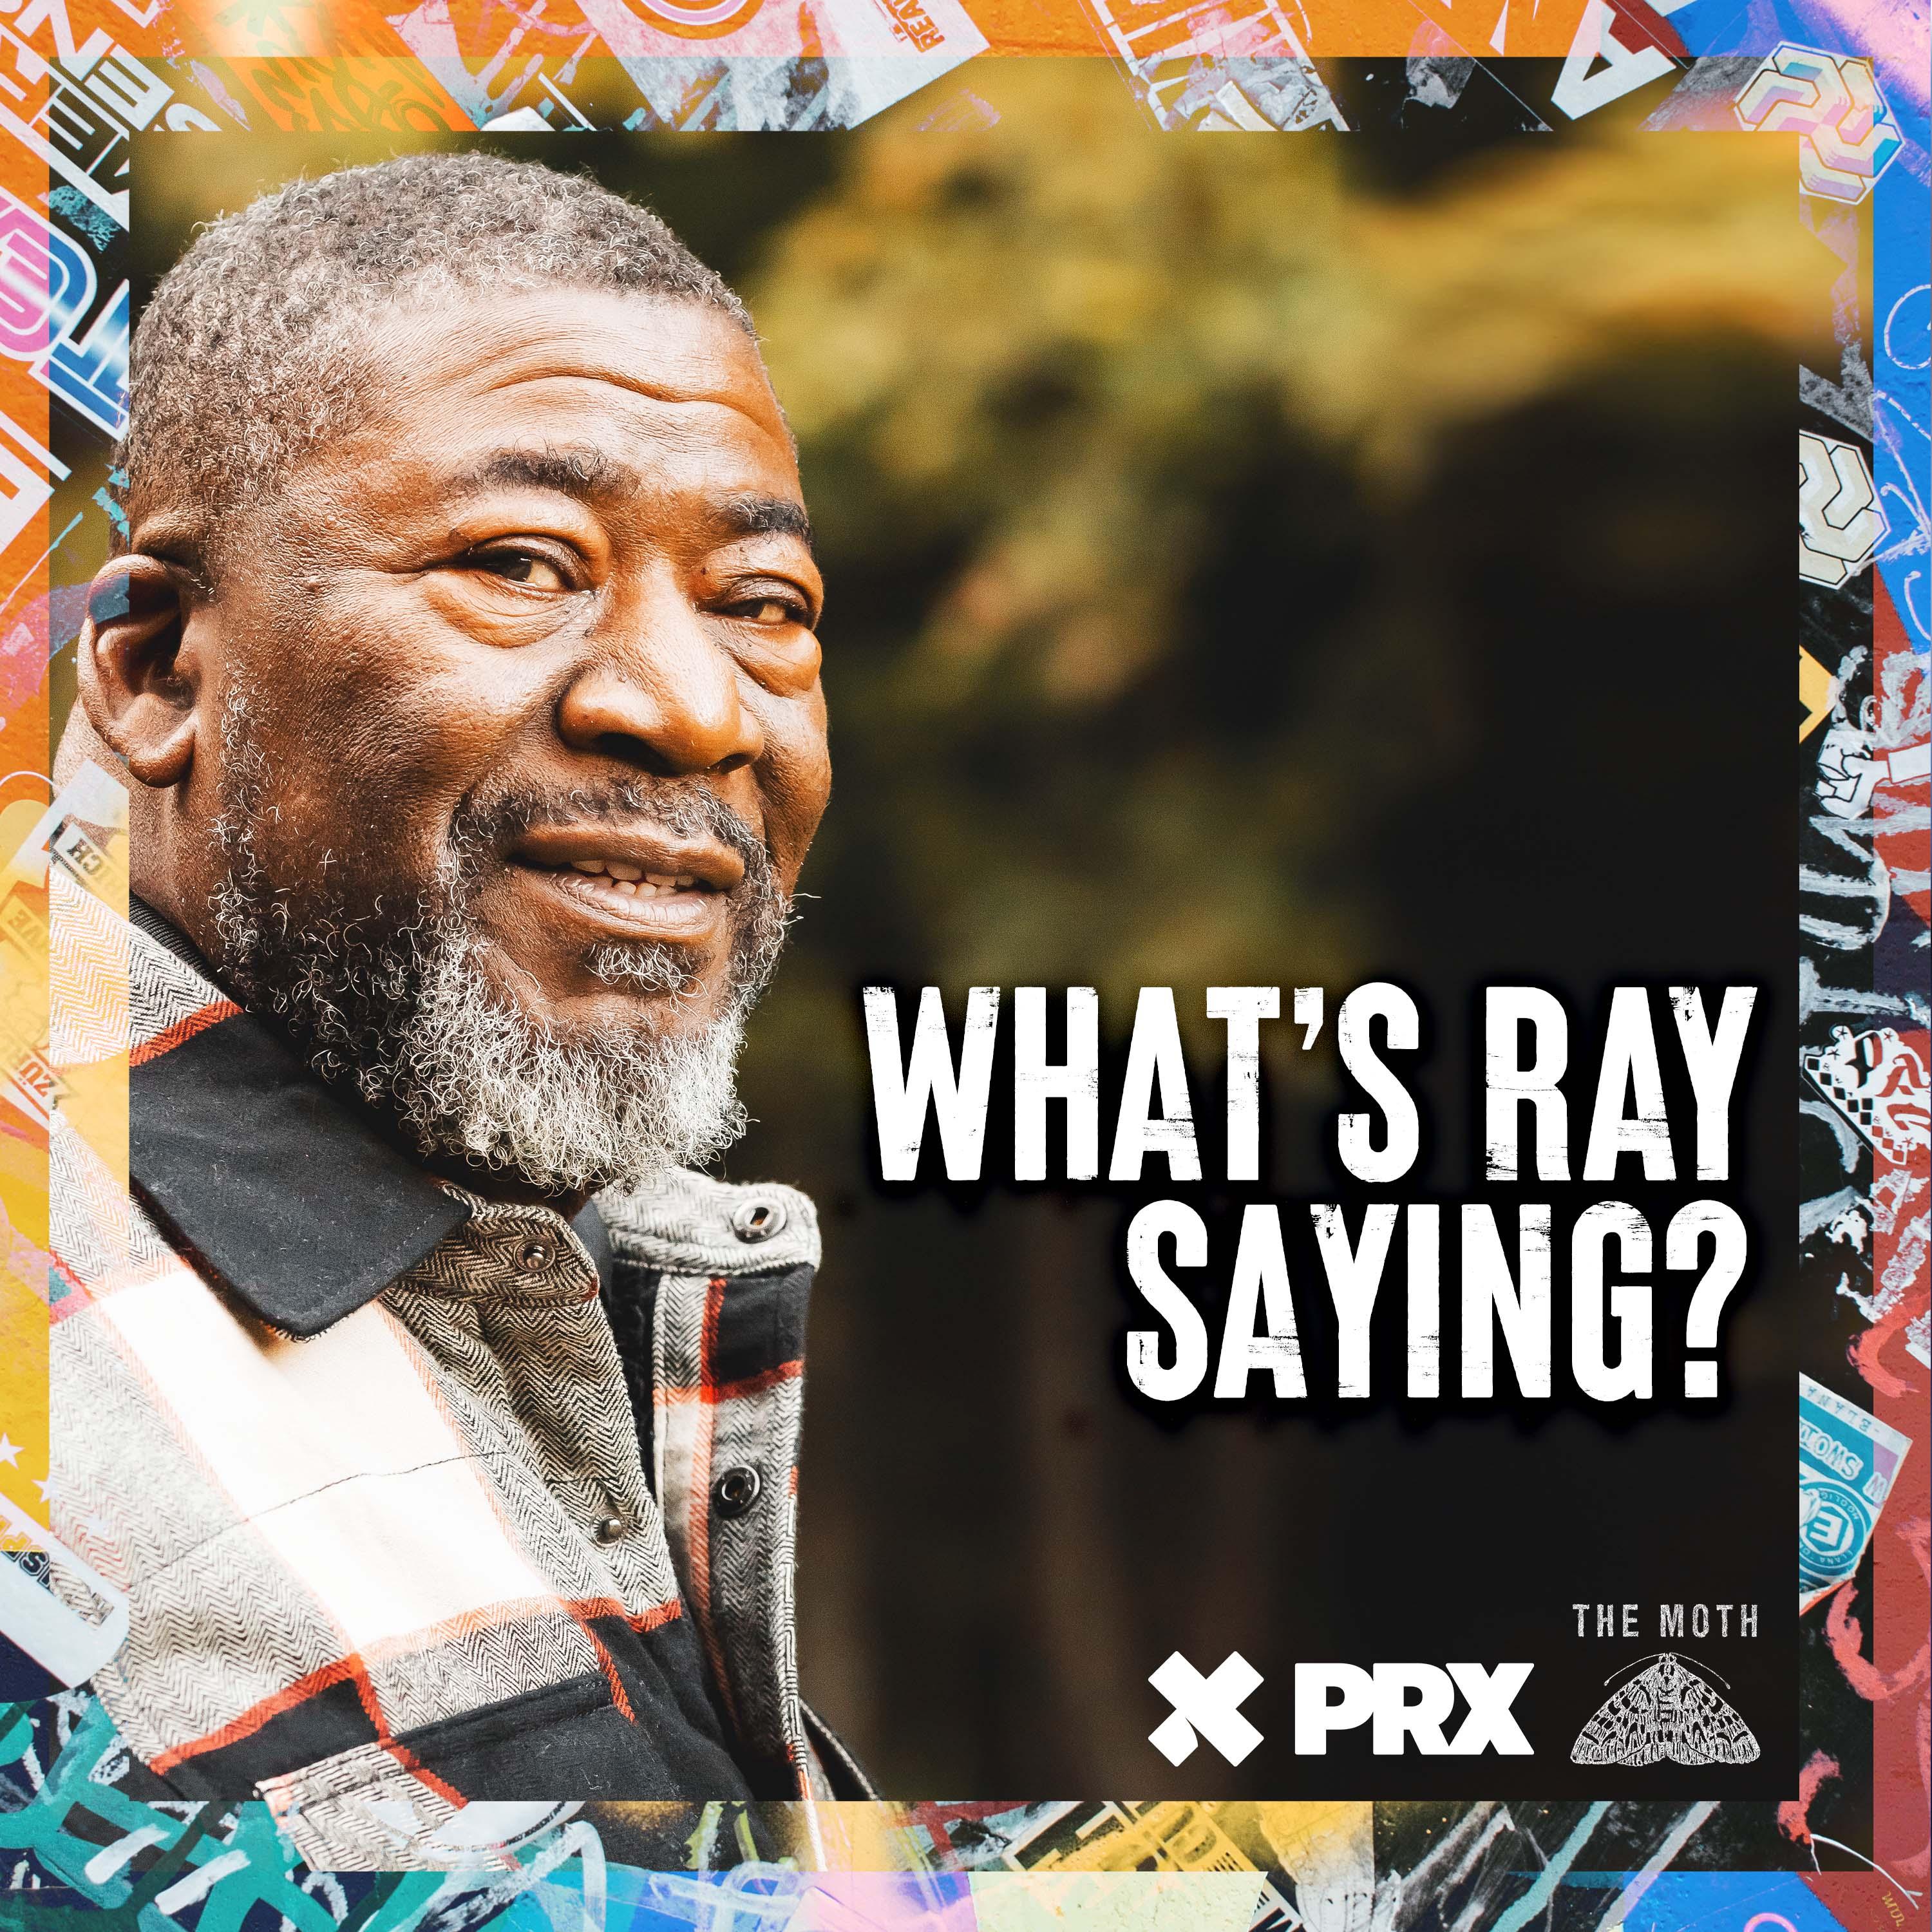 Thumbnail for "Introducing What's Ray Saying?".